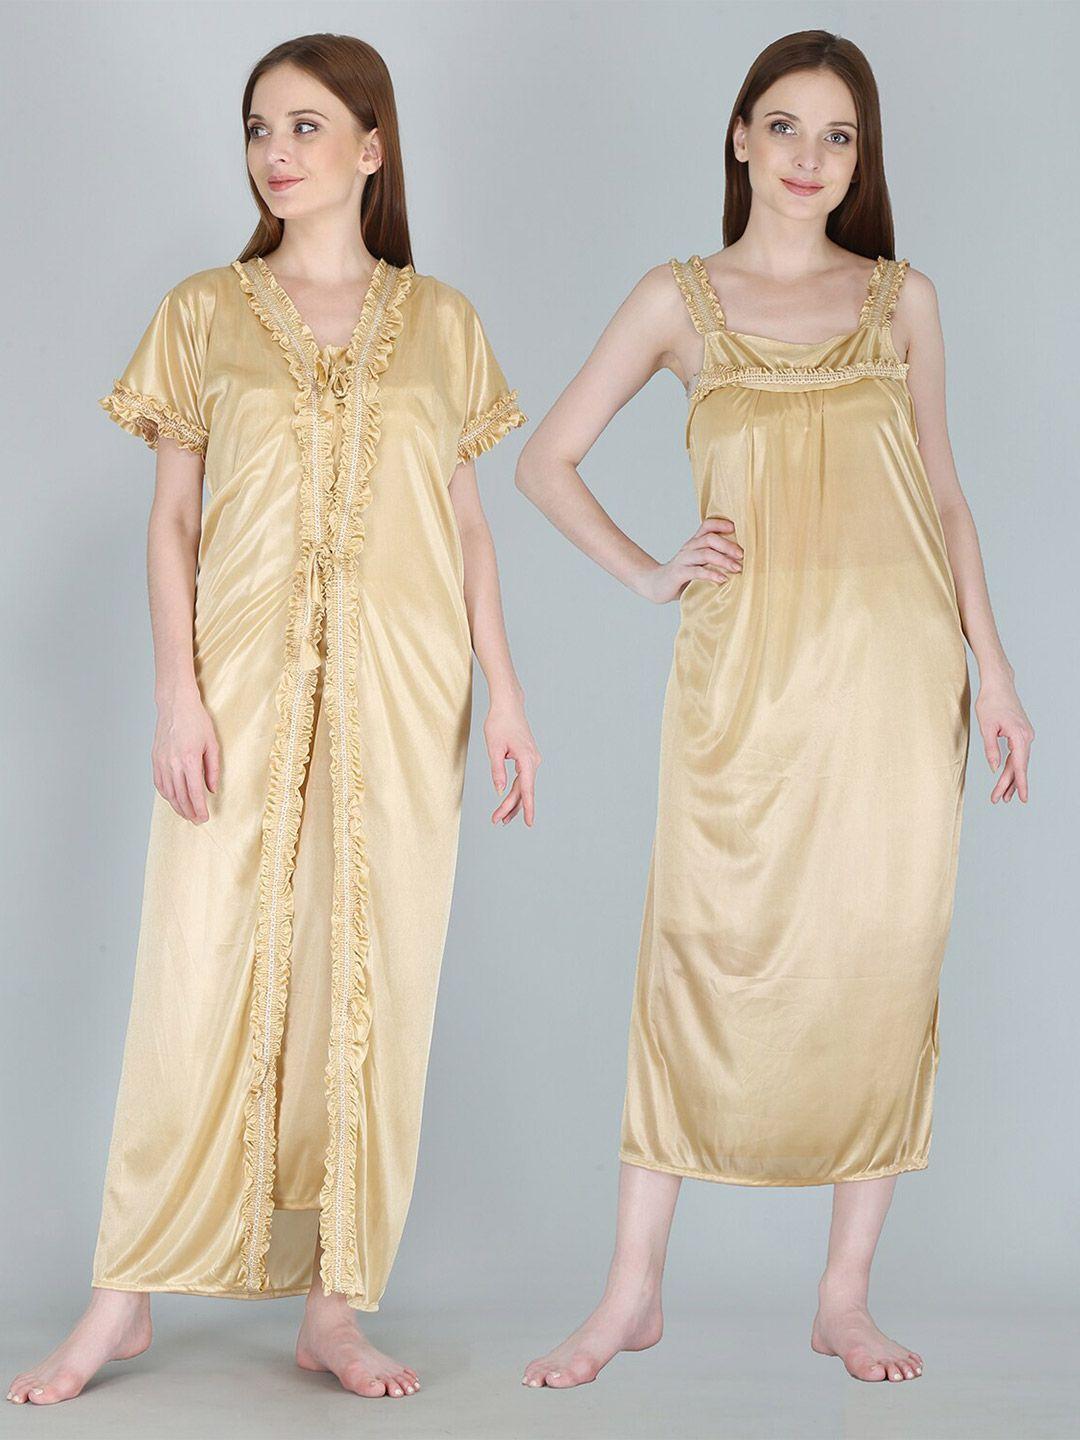 be you cream-coloured solid satin maxi nightdress